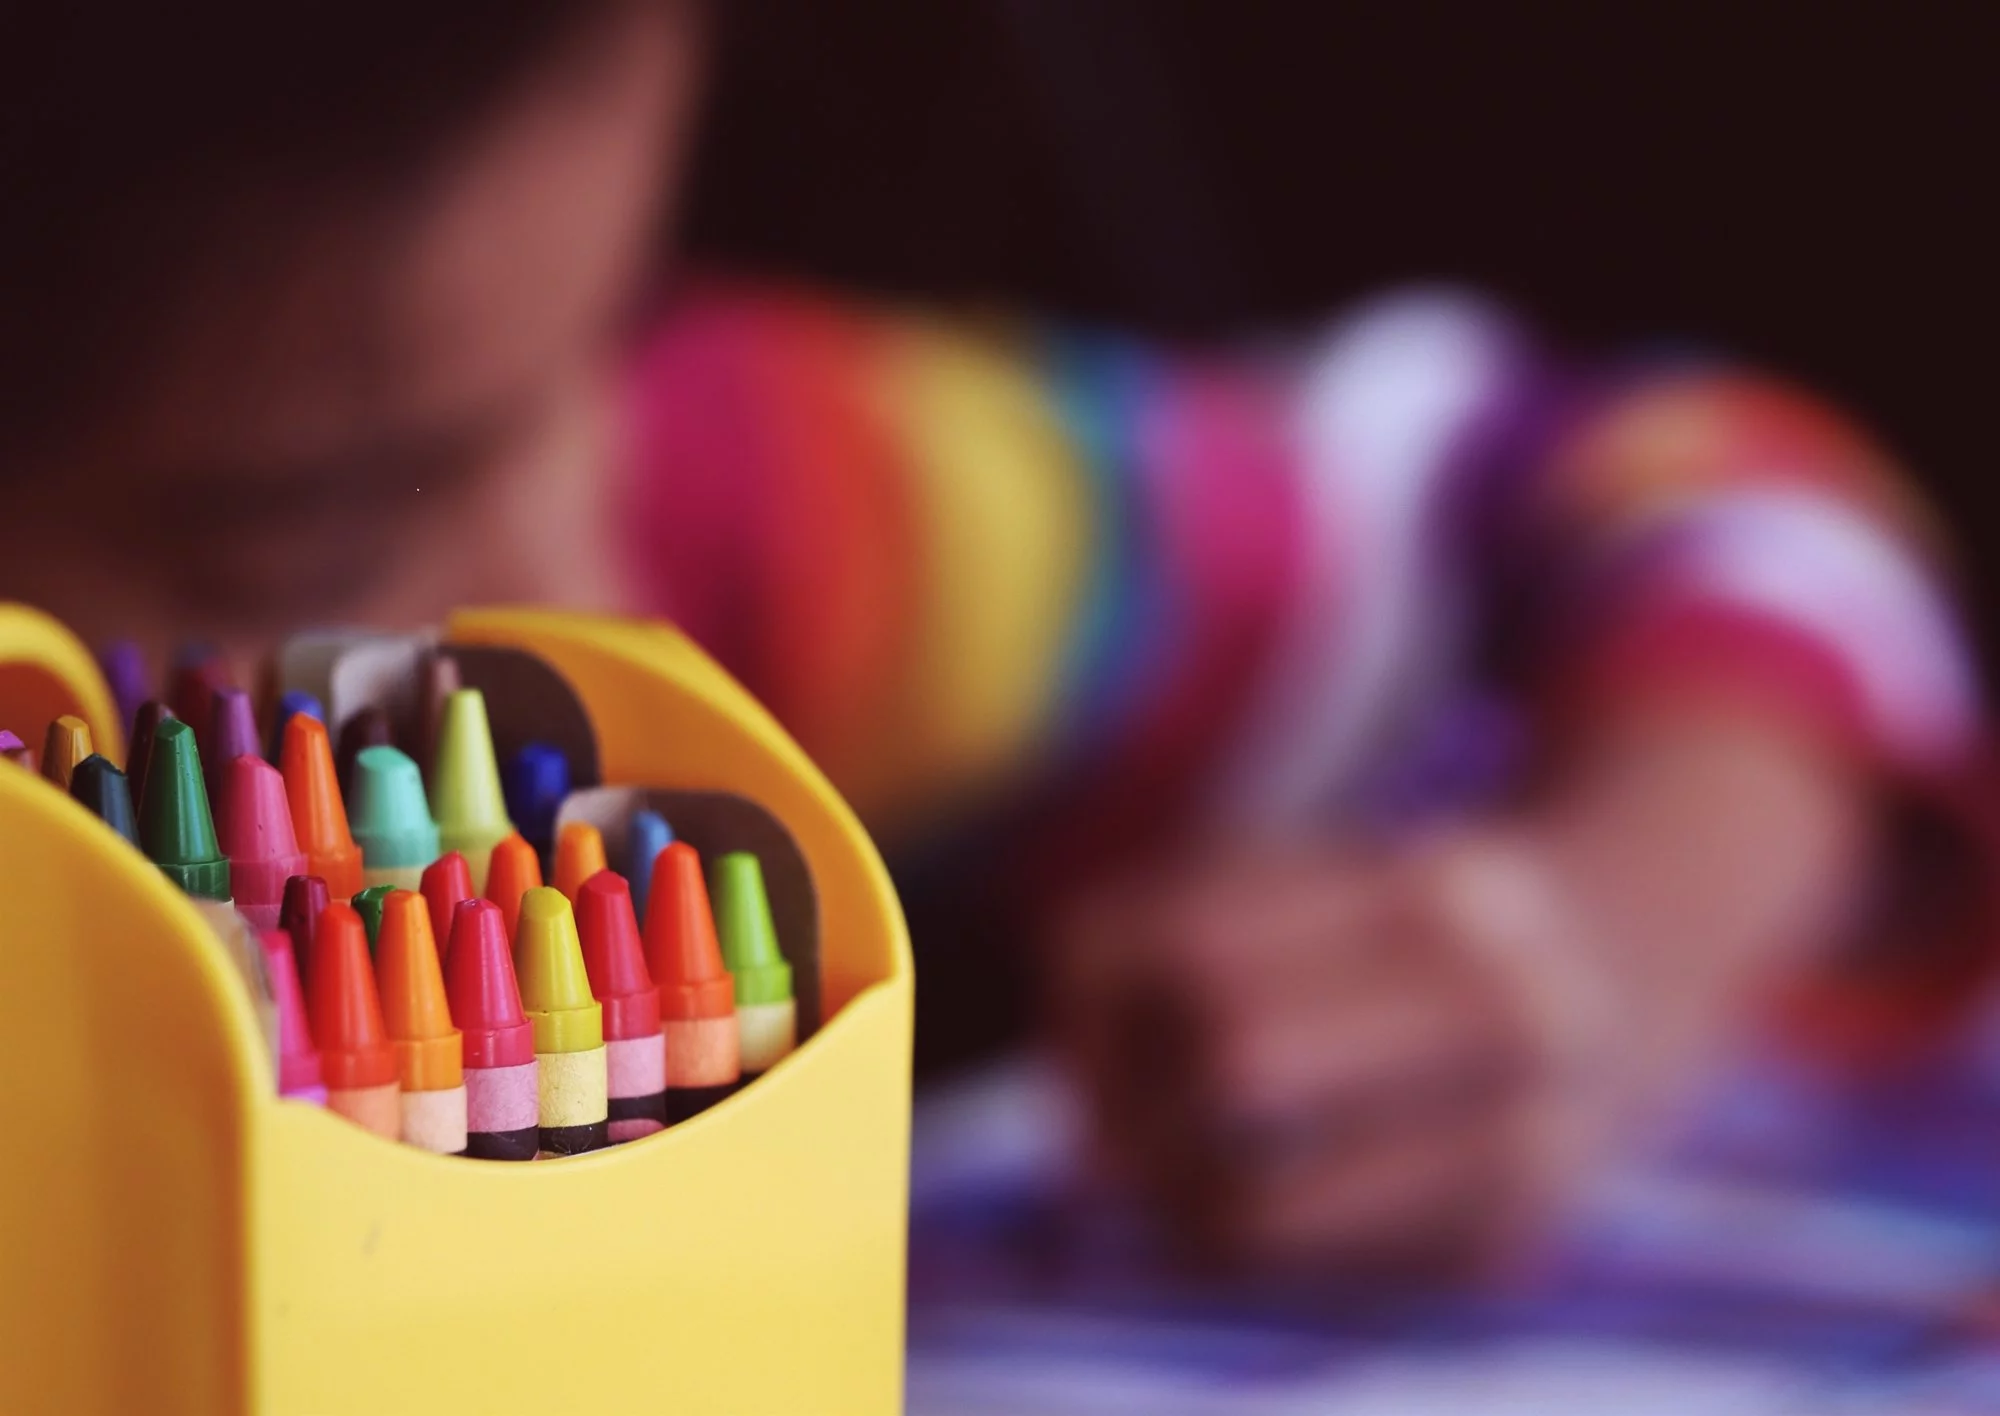 Why Do We Need White Crayons? Identifying and Empowering the Often